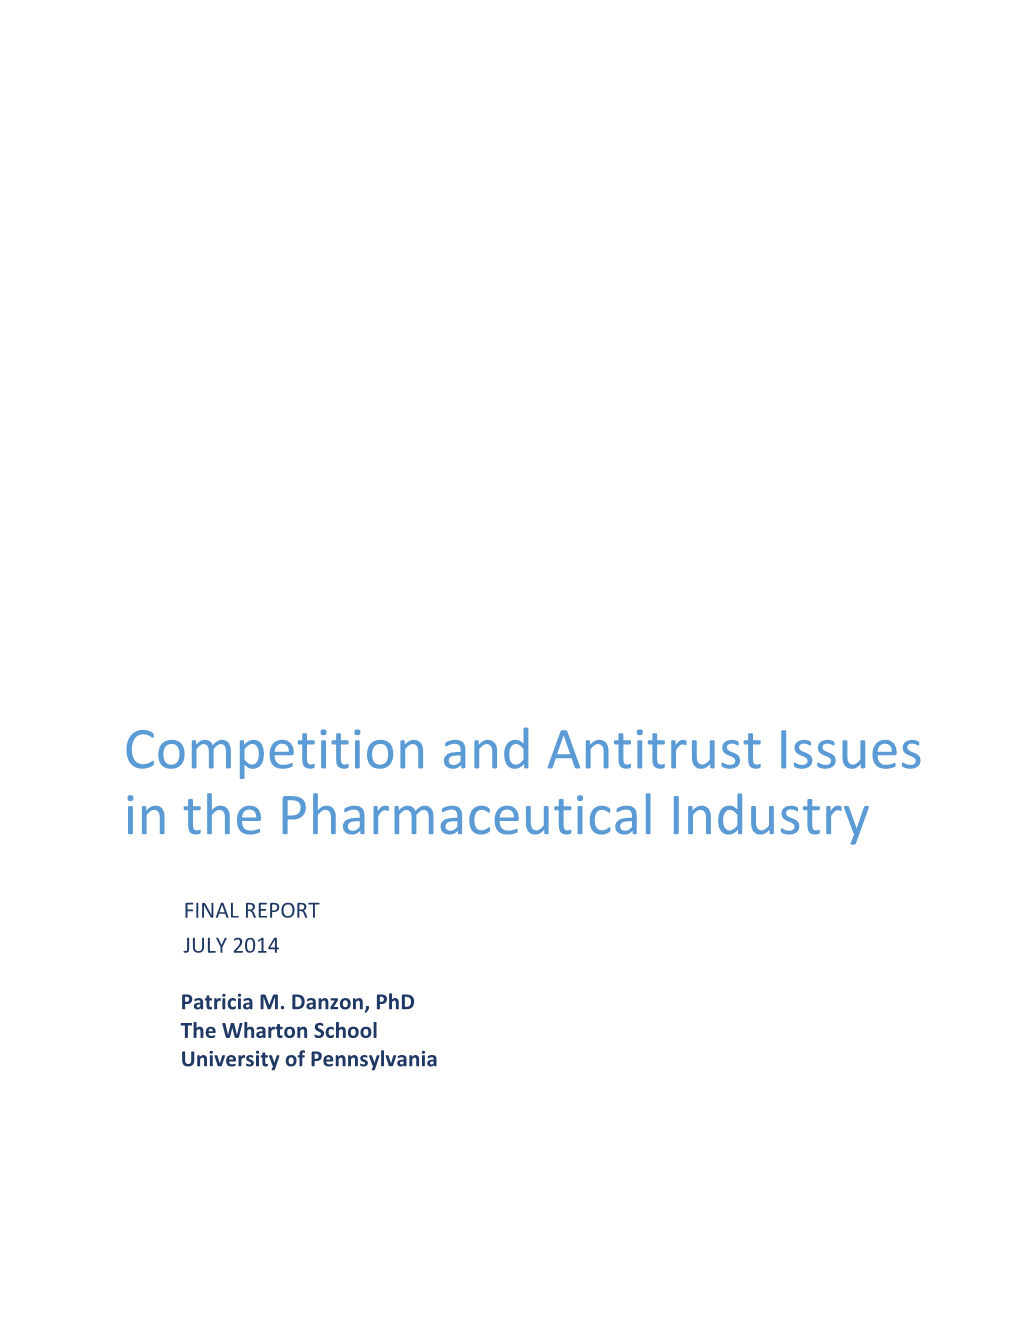 Competition and Antitrust Issues in the Pharmaceutical Industry